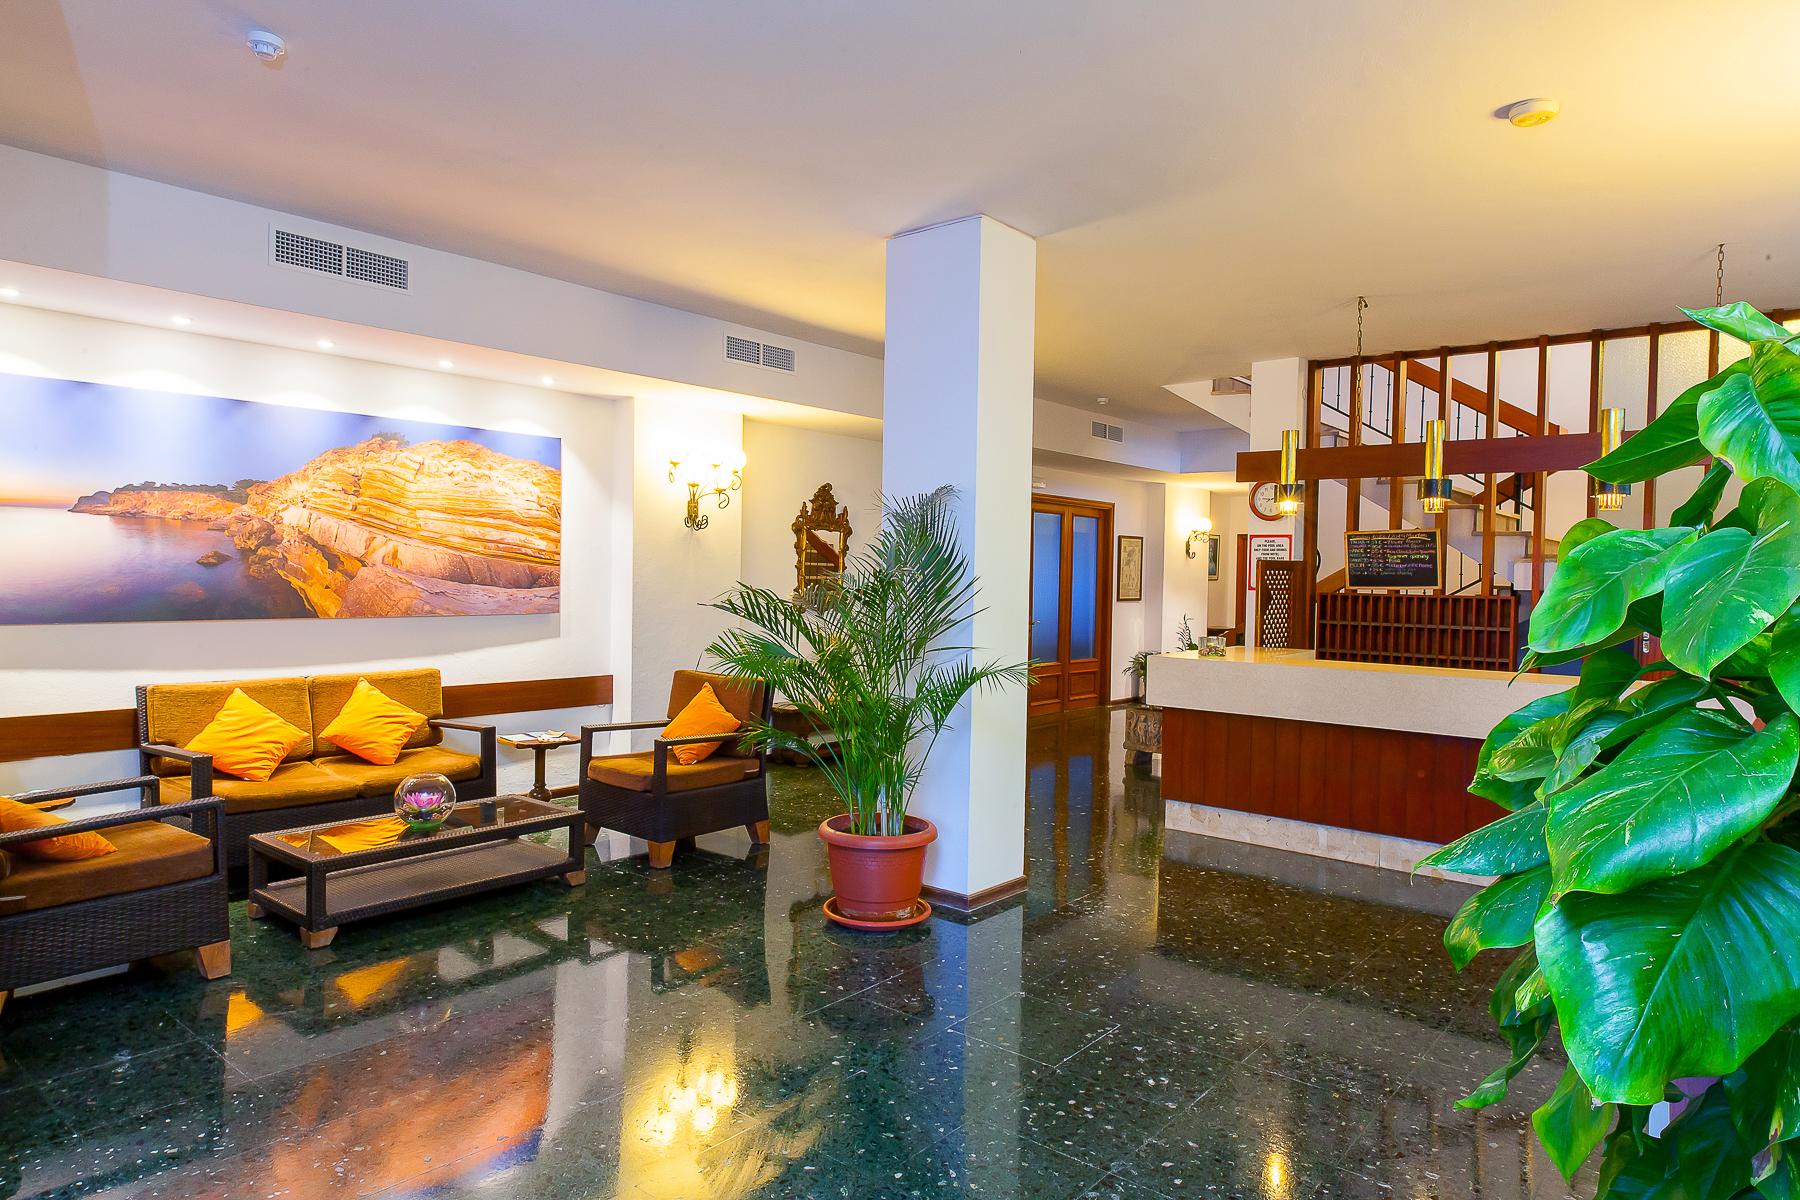 Hotel Galera - Image Gallery of rooms, hotel services, pool, breakfasts